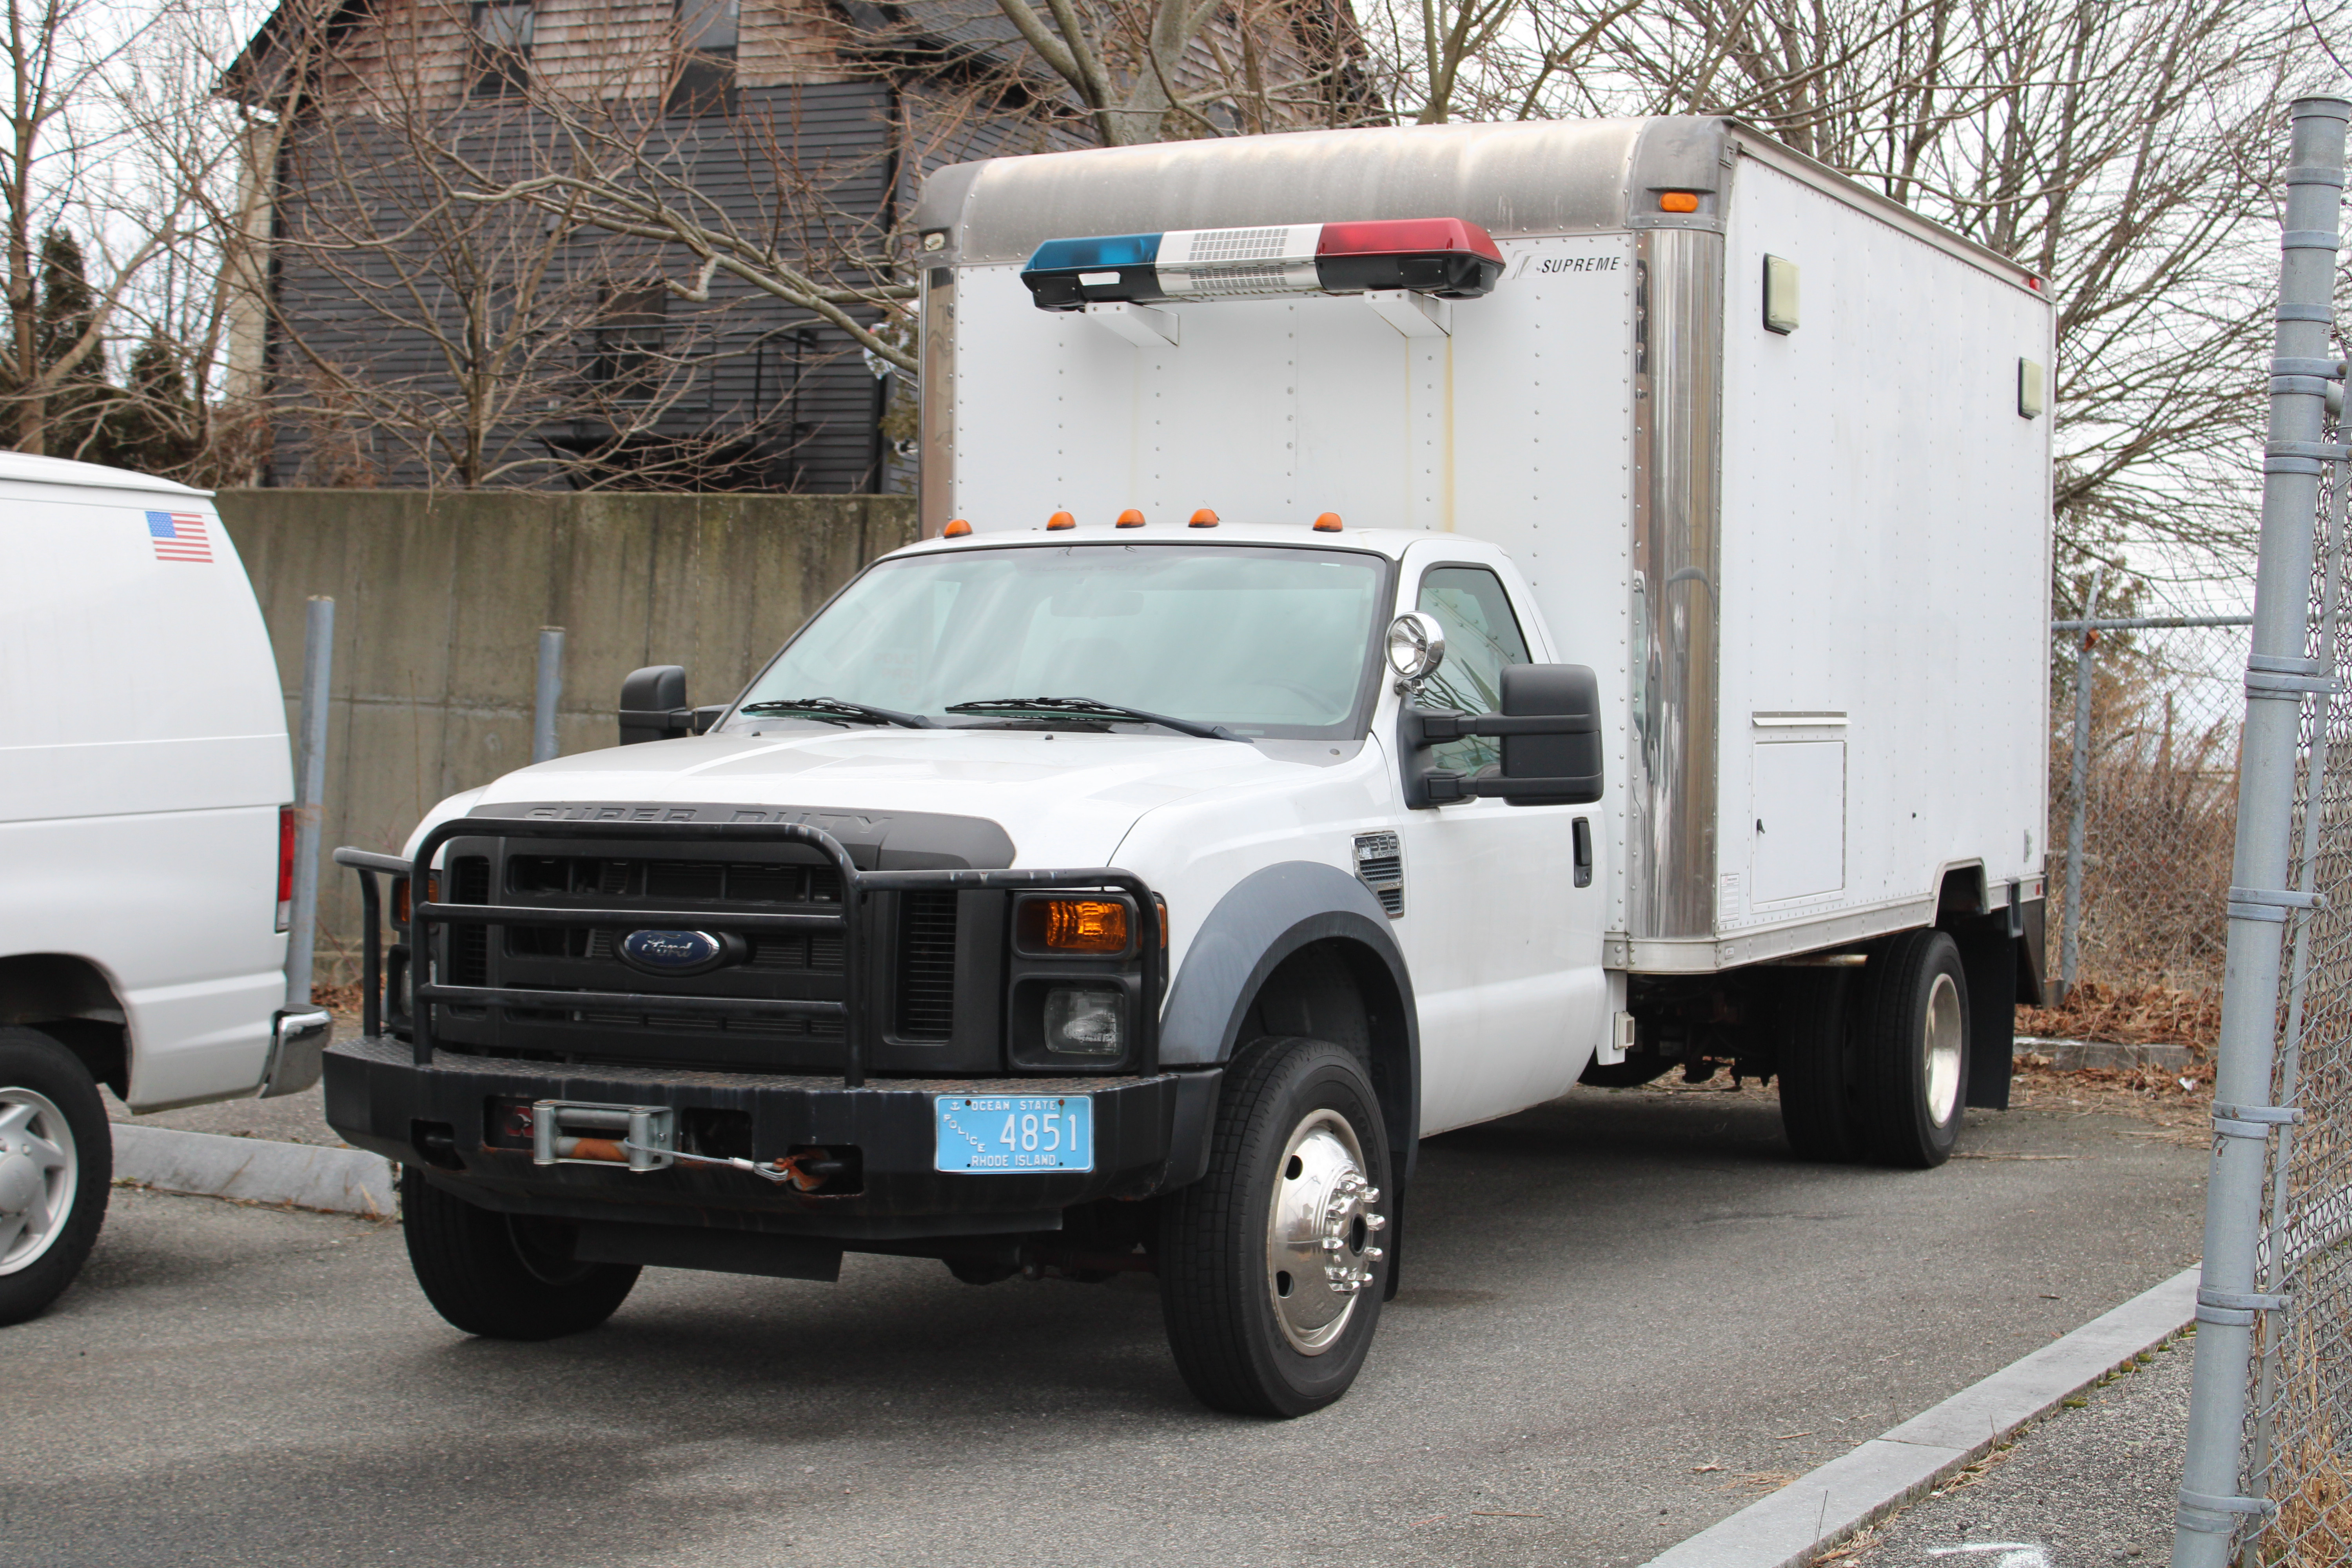 A photo  of Providence Police
            Truck 4851, a 2008-2010 Ford F-550             taken by @riemergencyvehicles